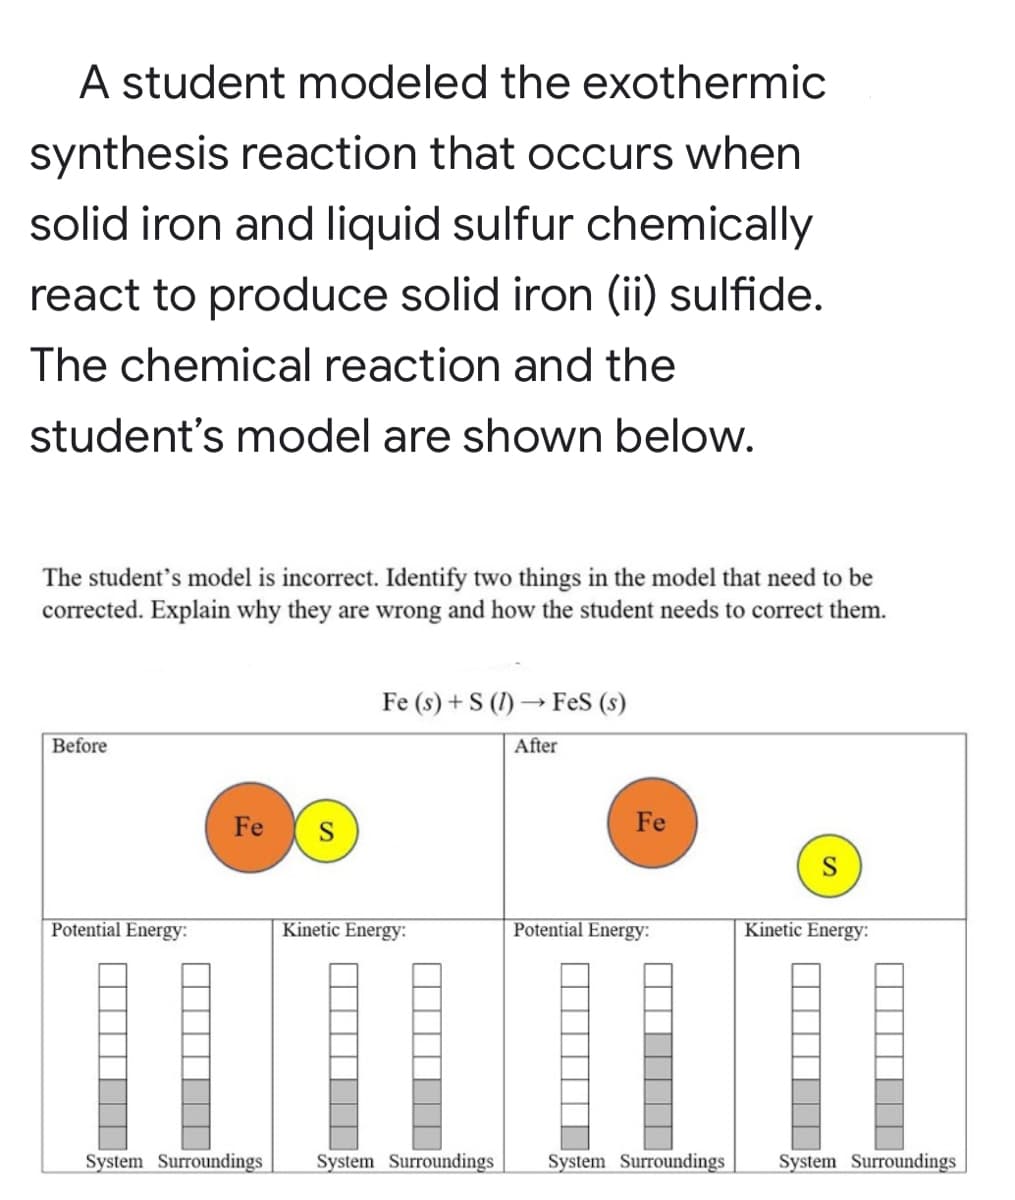 A student modeled the exothermic
synthesis reaction that occurs when
solid iron and liquid sulfur chemically
react to produce solid iron (ii) sulfide.
The chemical reaction and the
student's model are shown below.
The student's model is incorrect. Identify two things in the model that need to be
corrected. Explain why they are wrong and how the student needs to correct them.
Fe (s) + S (1) → FeS (s)
Before
After
Fe
S
Fe
Potential Energy:
Kinetic Energy:
Potential Energy:
Kinetic Energy:
System Surroundings
System Surroundings
System Surroundings
System Surroundings
